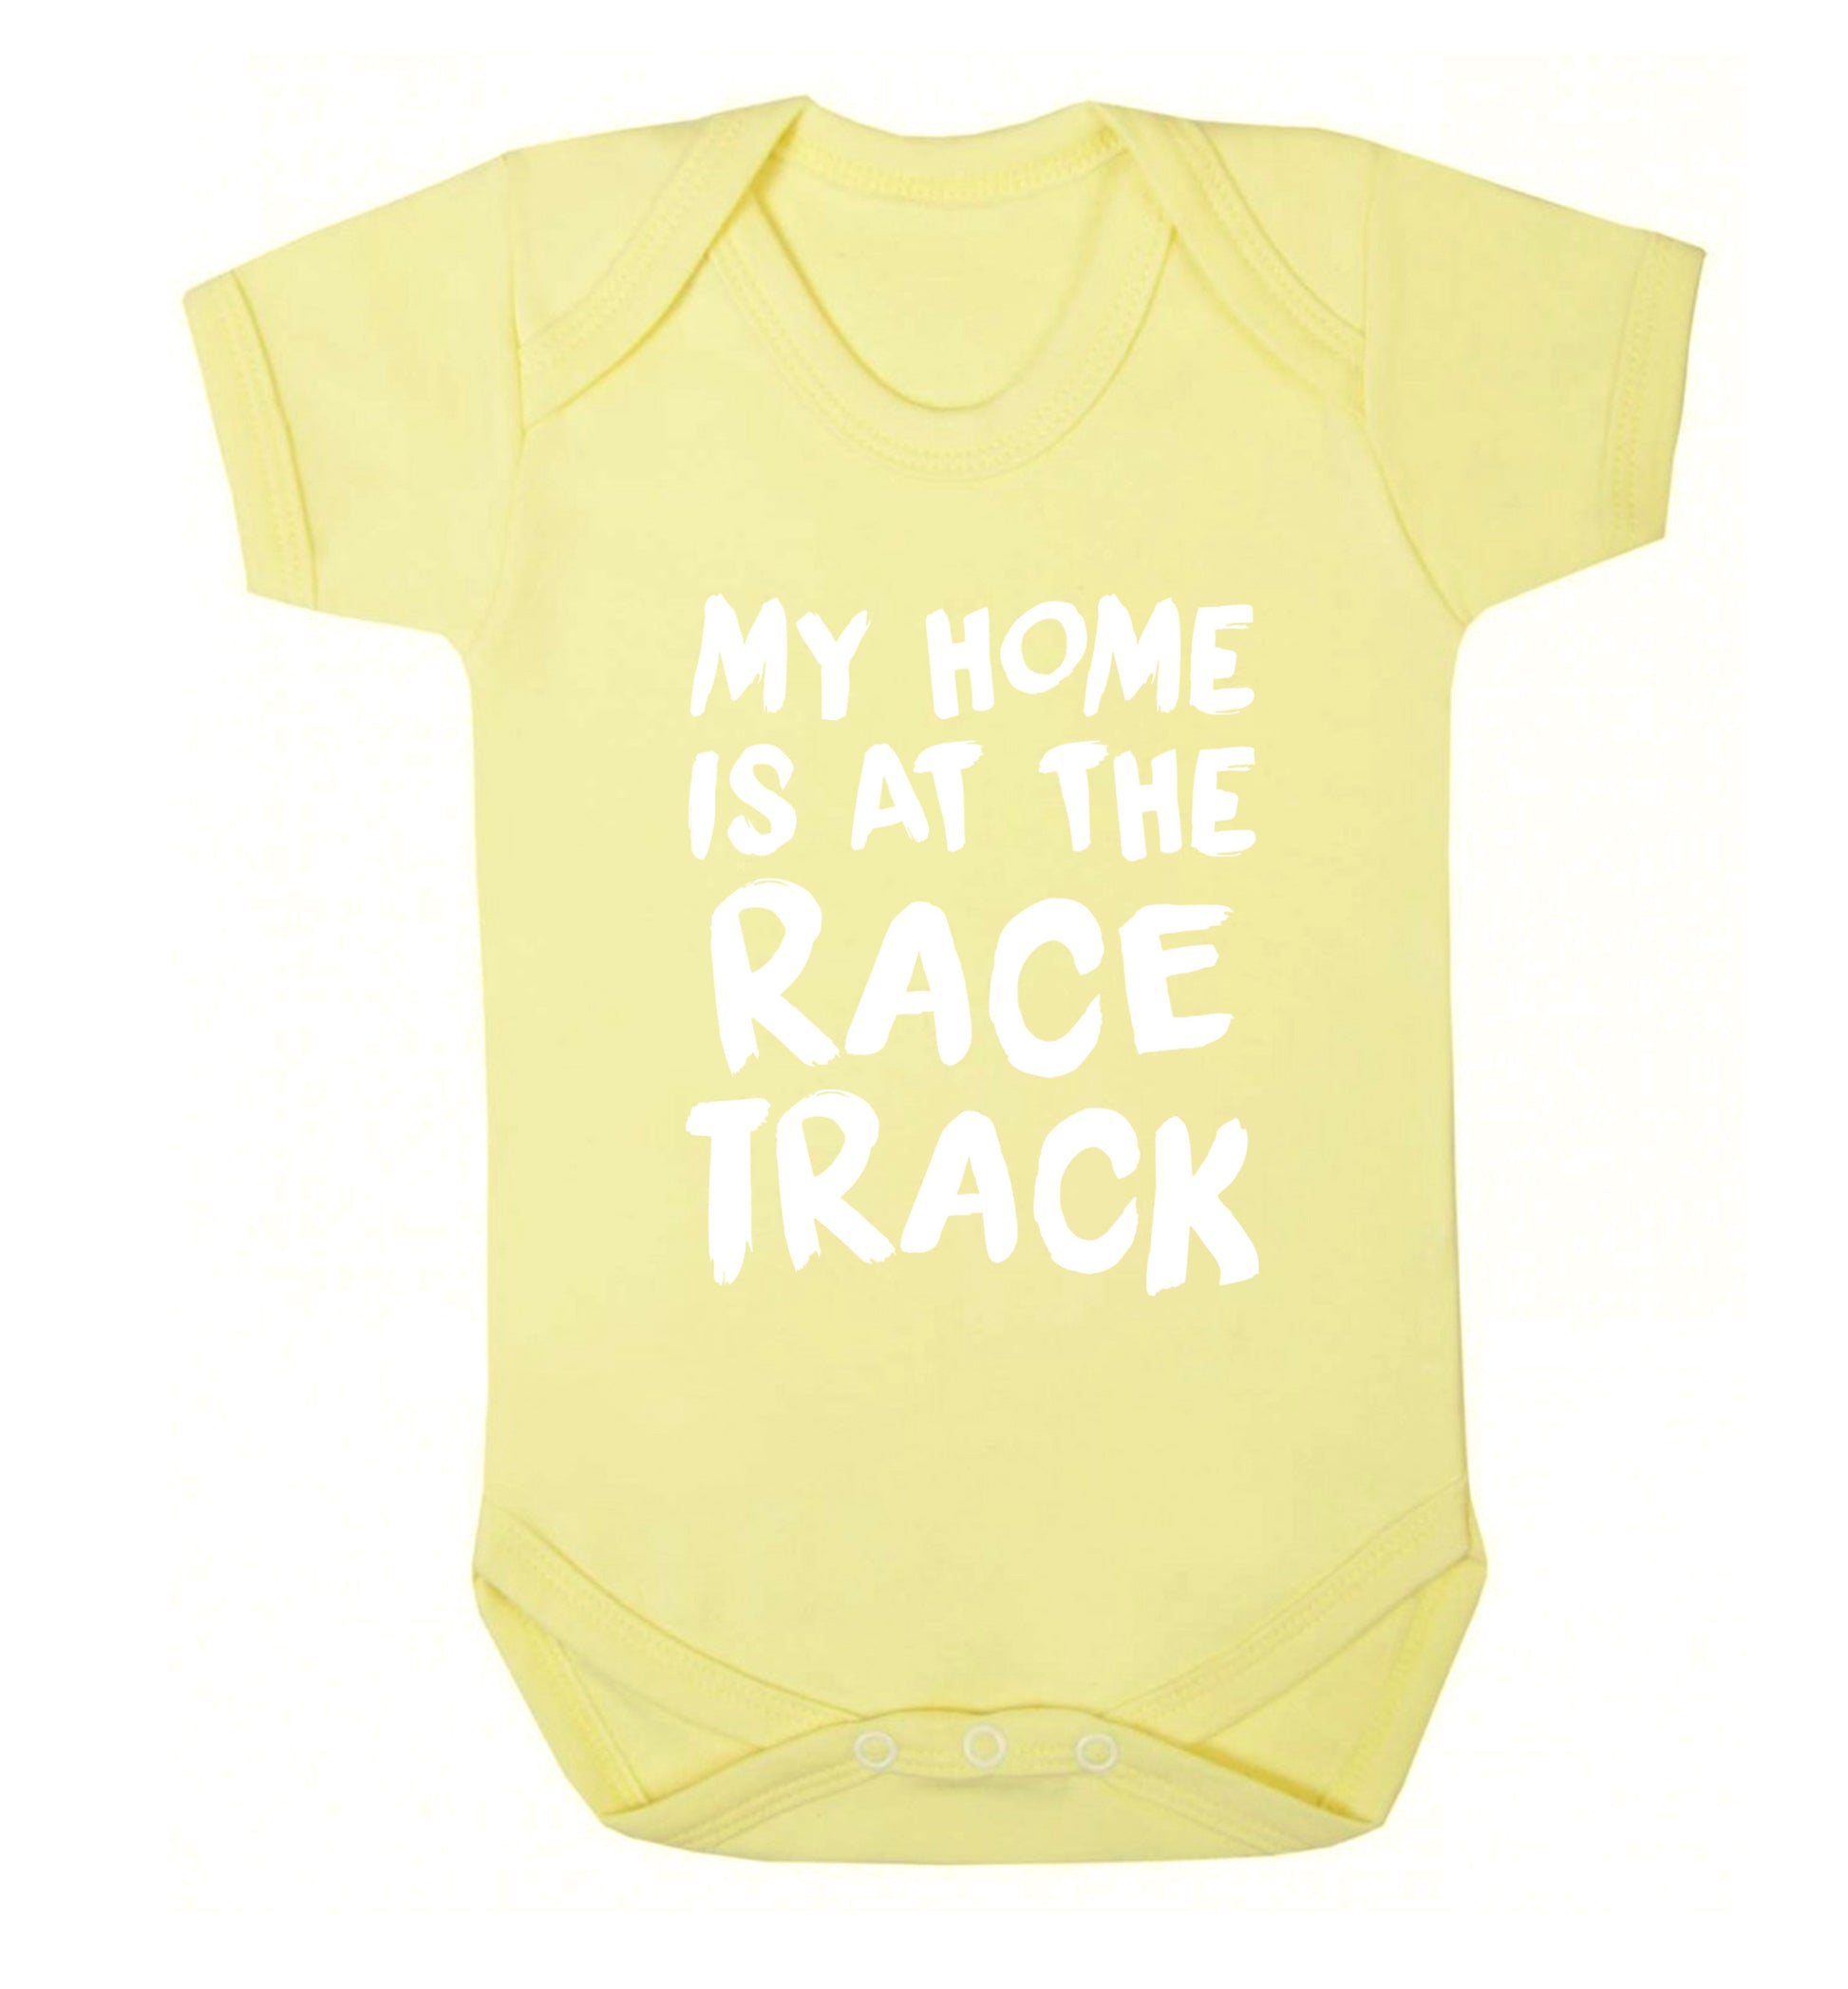 My home is at the race track Baby Vest pale yellow 18-24 months